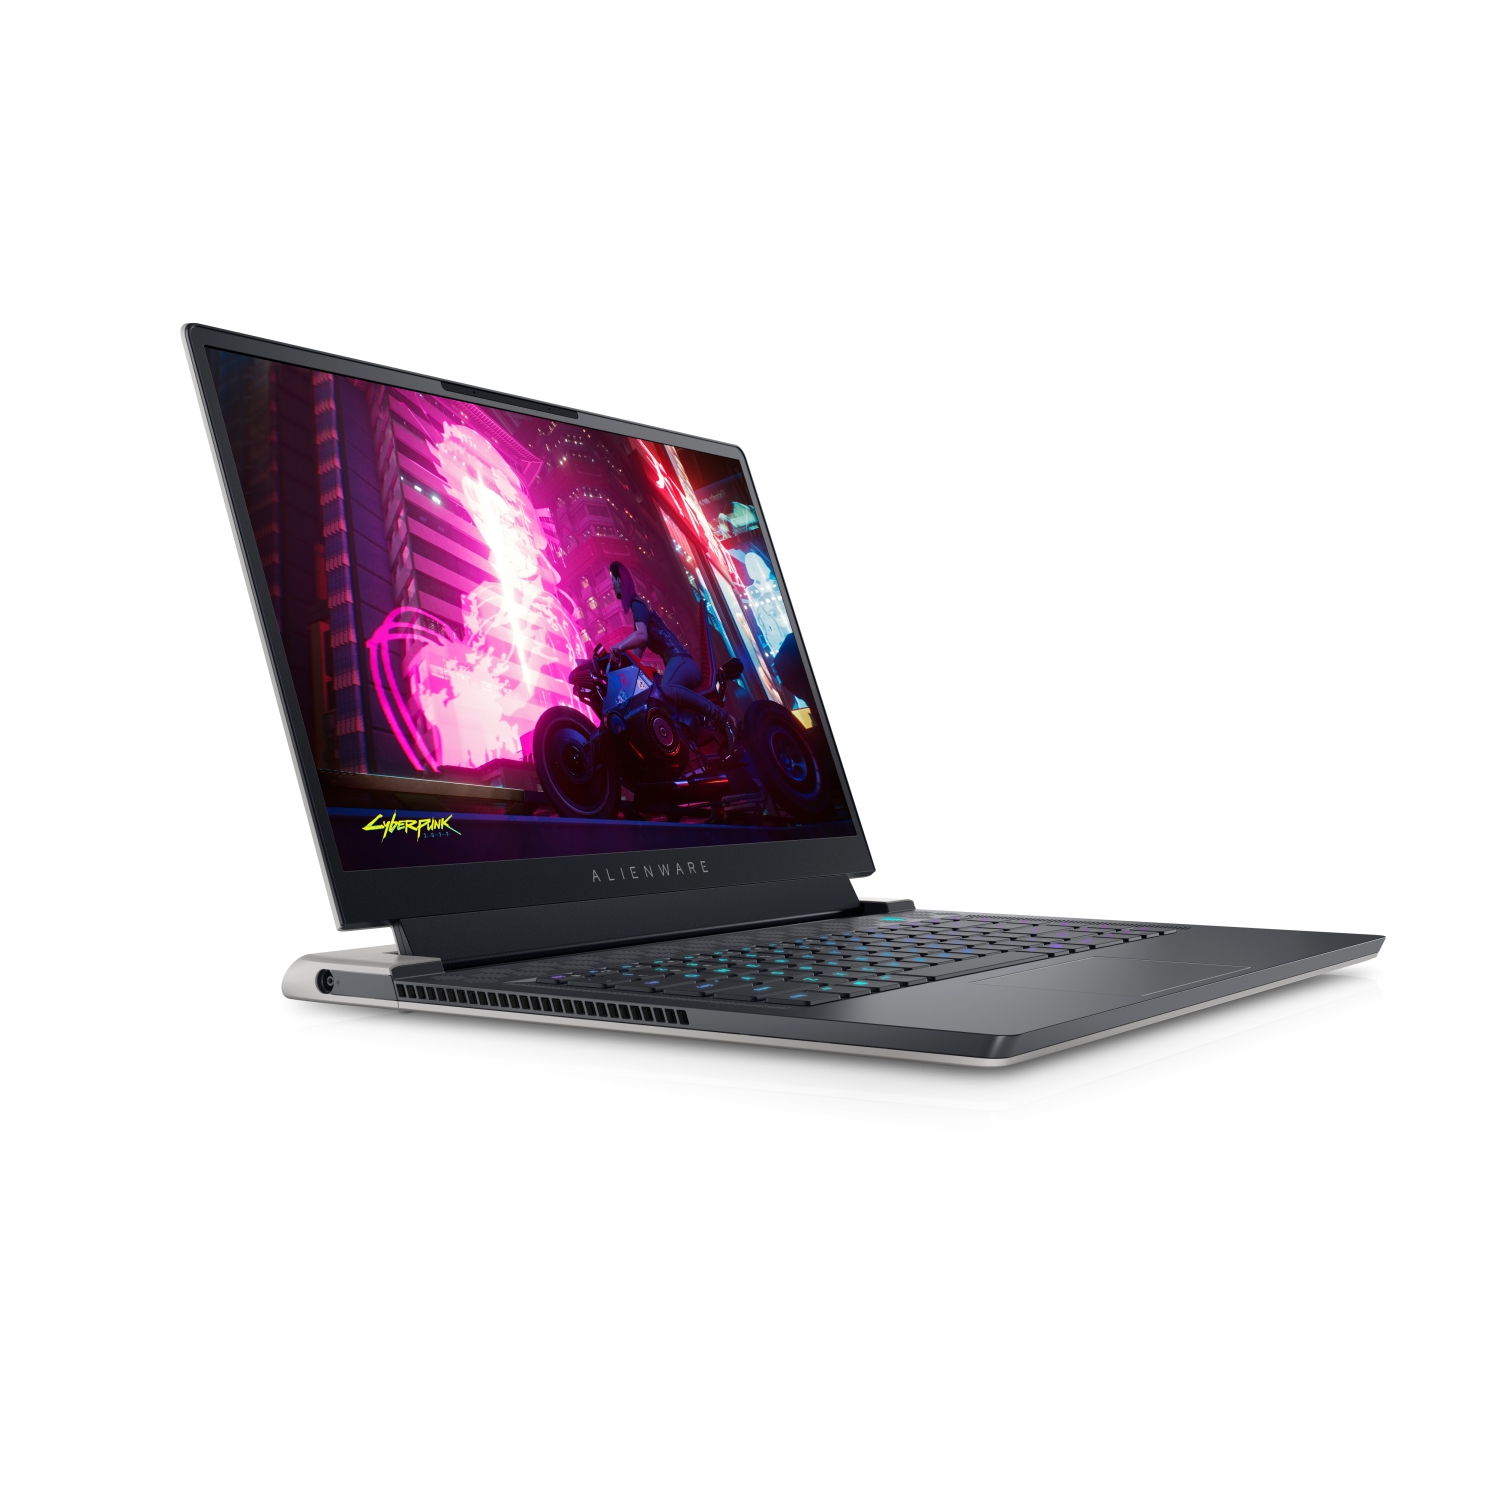 Refurbished (Excellent) - Dell Alienware X15 R1 Gaming Laptop (2021), 15.6" QHD, Core i7 - 256GB SSD + 256GB SSD - 16GB RAM - RTX 3070, 4.6 GHz - 11th Gen CPU Certified